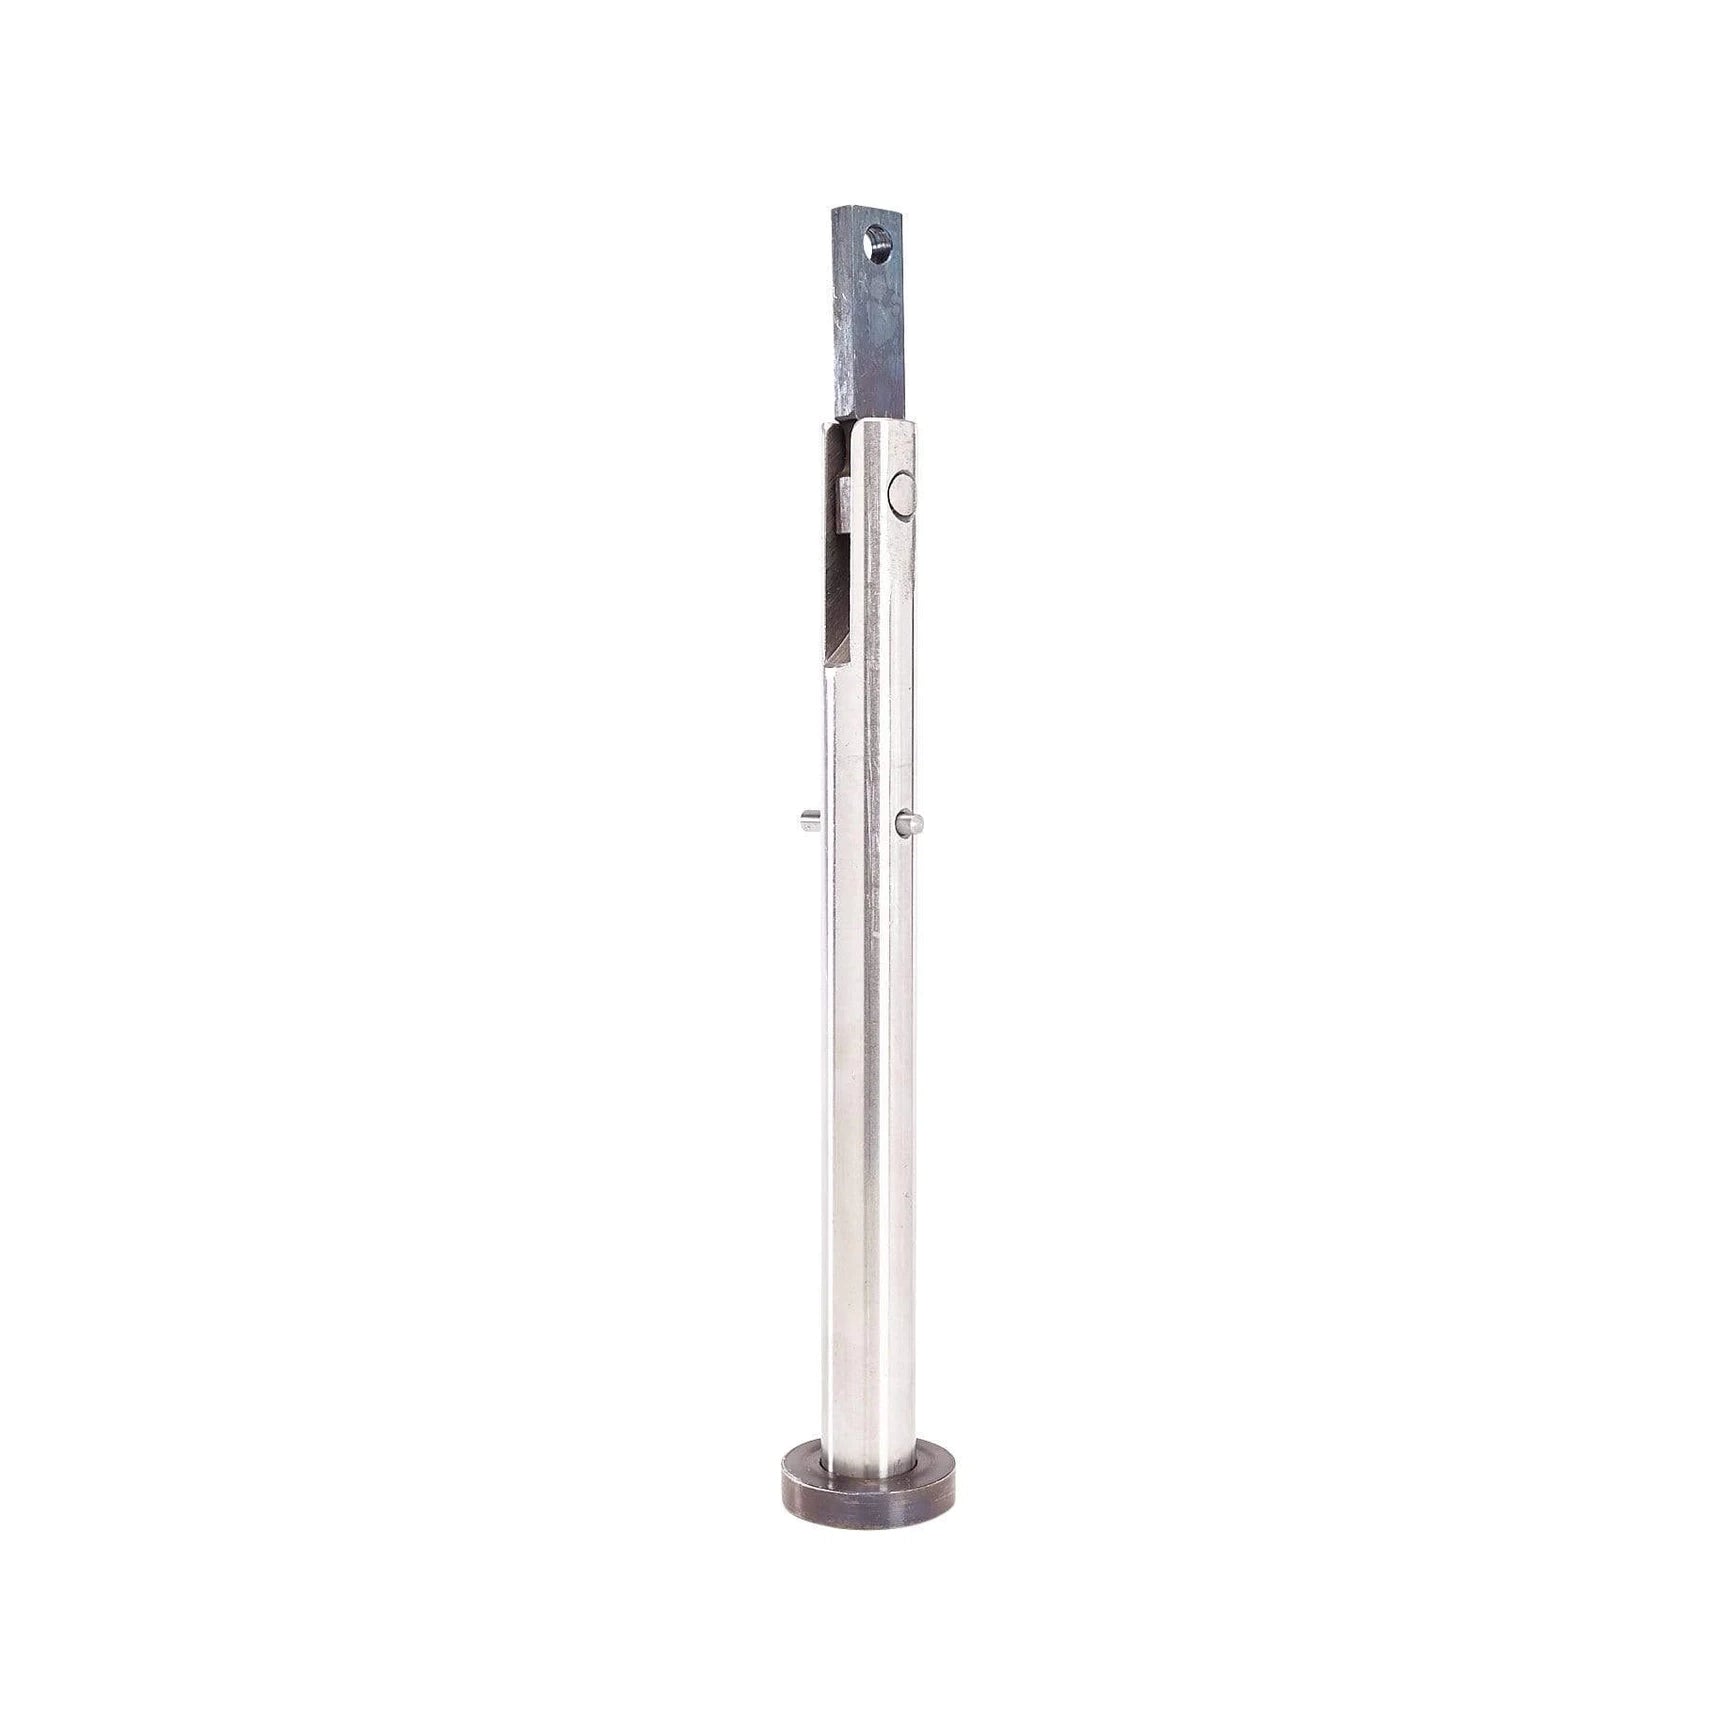 Shaft Only For Foot Model 916 Machine Adapter Not Inculded, #T-1133-SHAFT 916